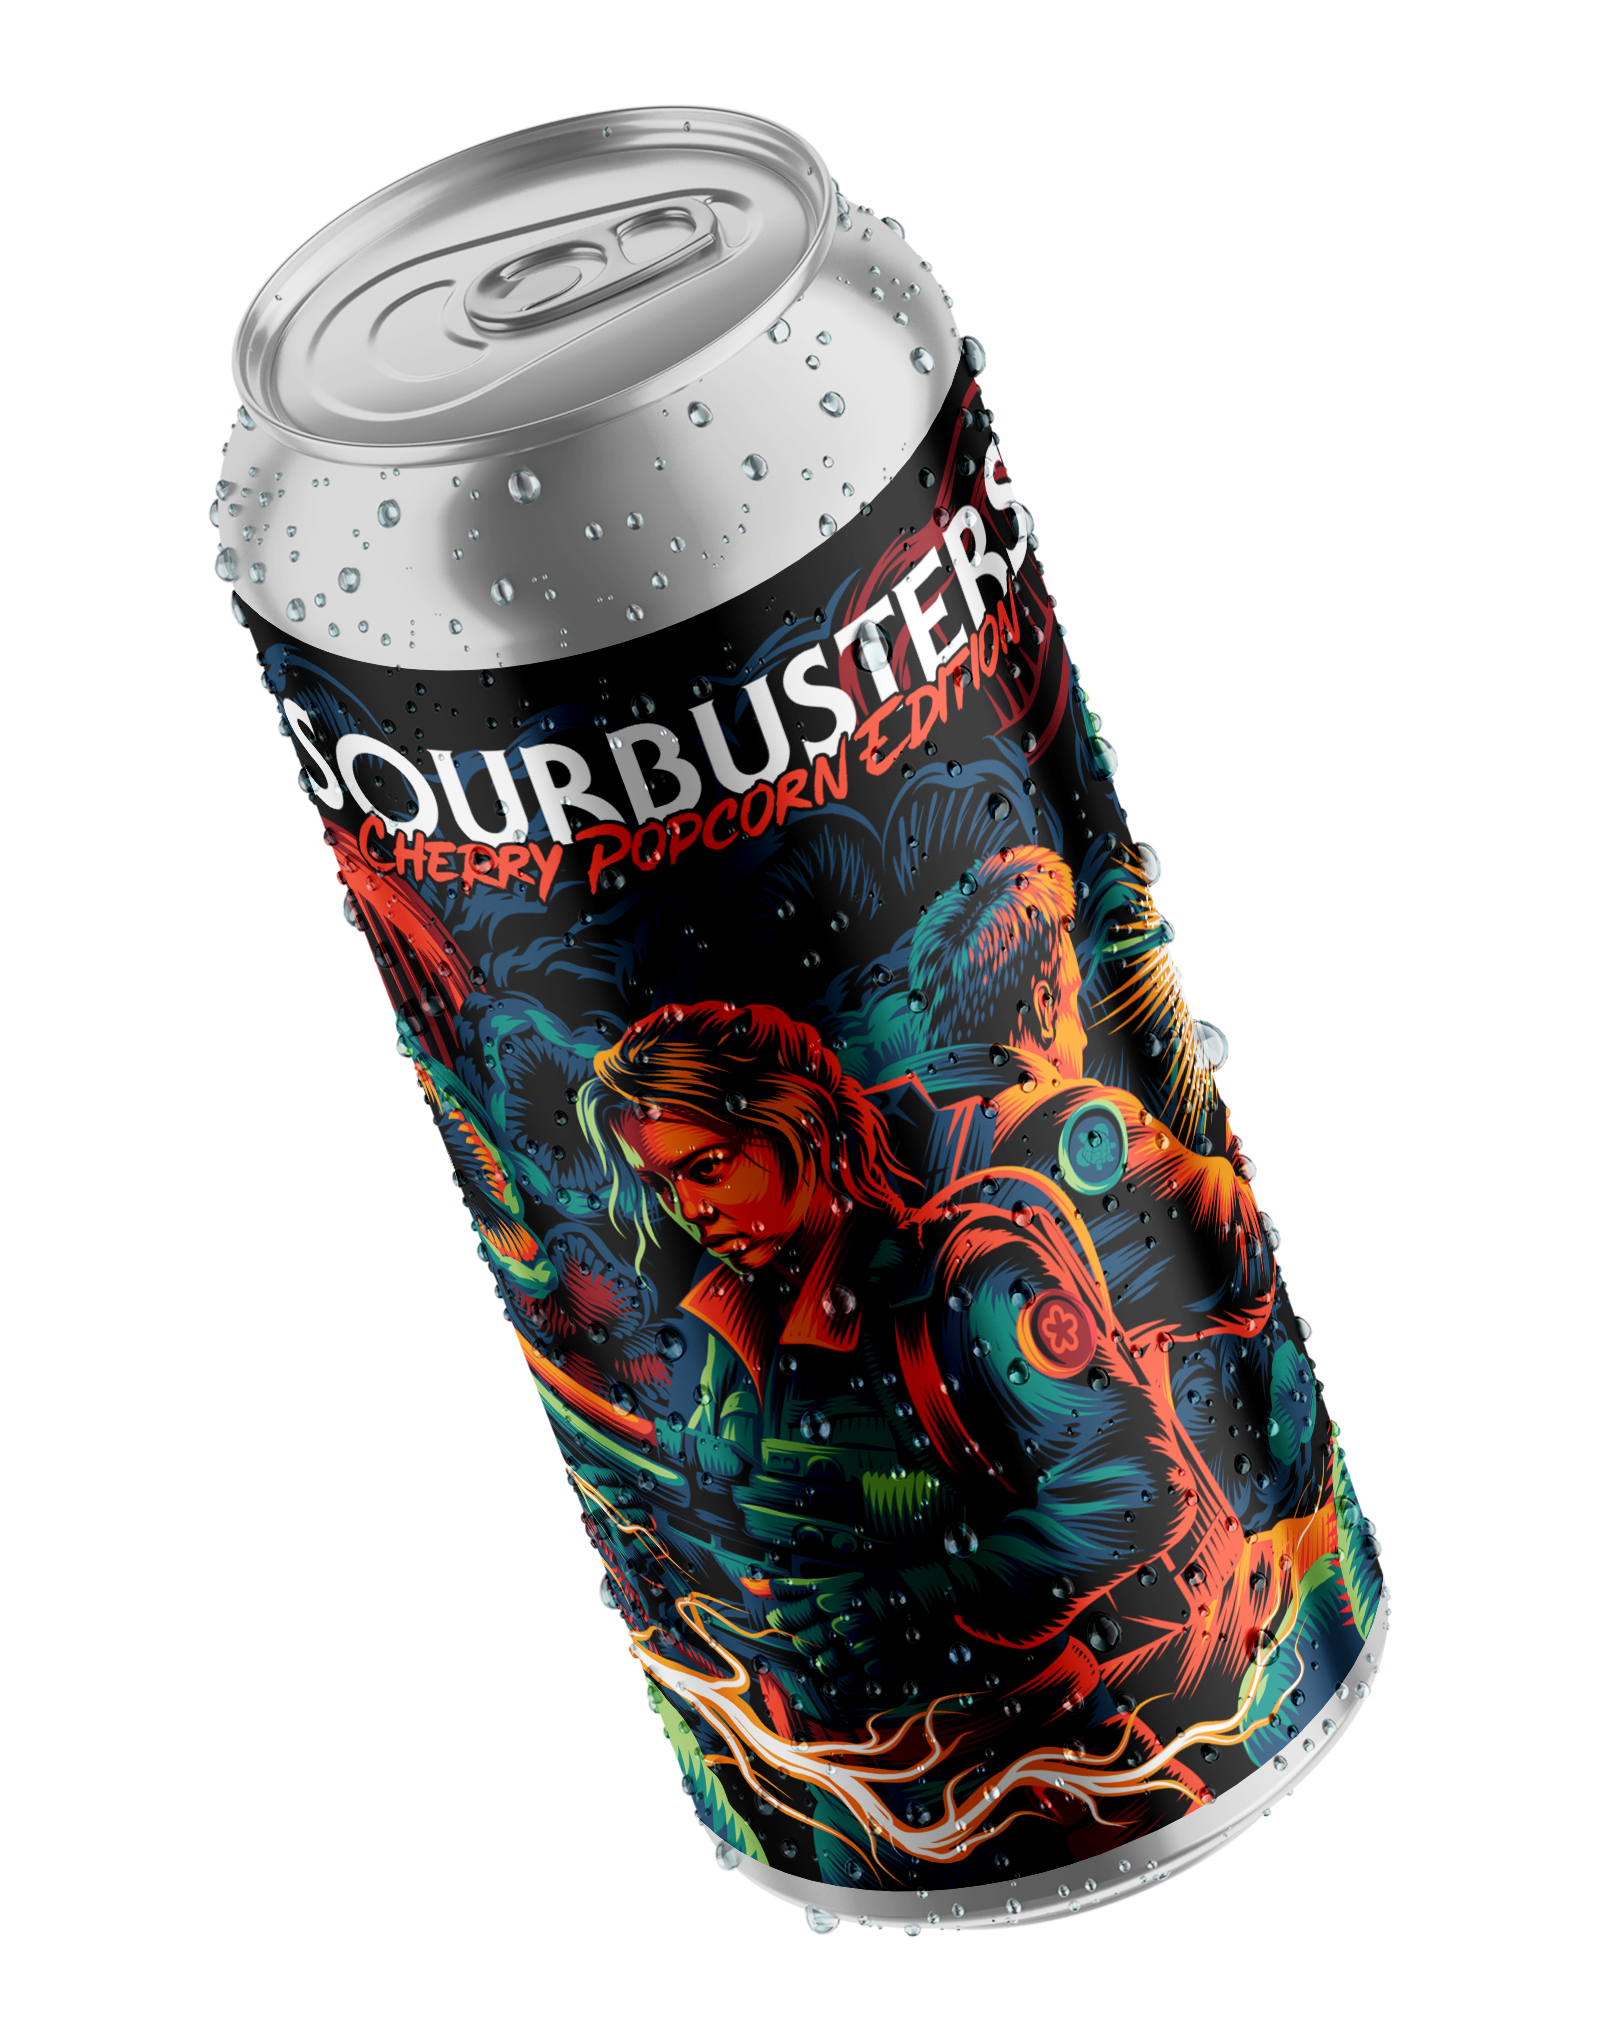 Банка пива SourBusters - Fruit Sour от Panzer Brewery